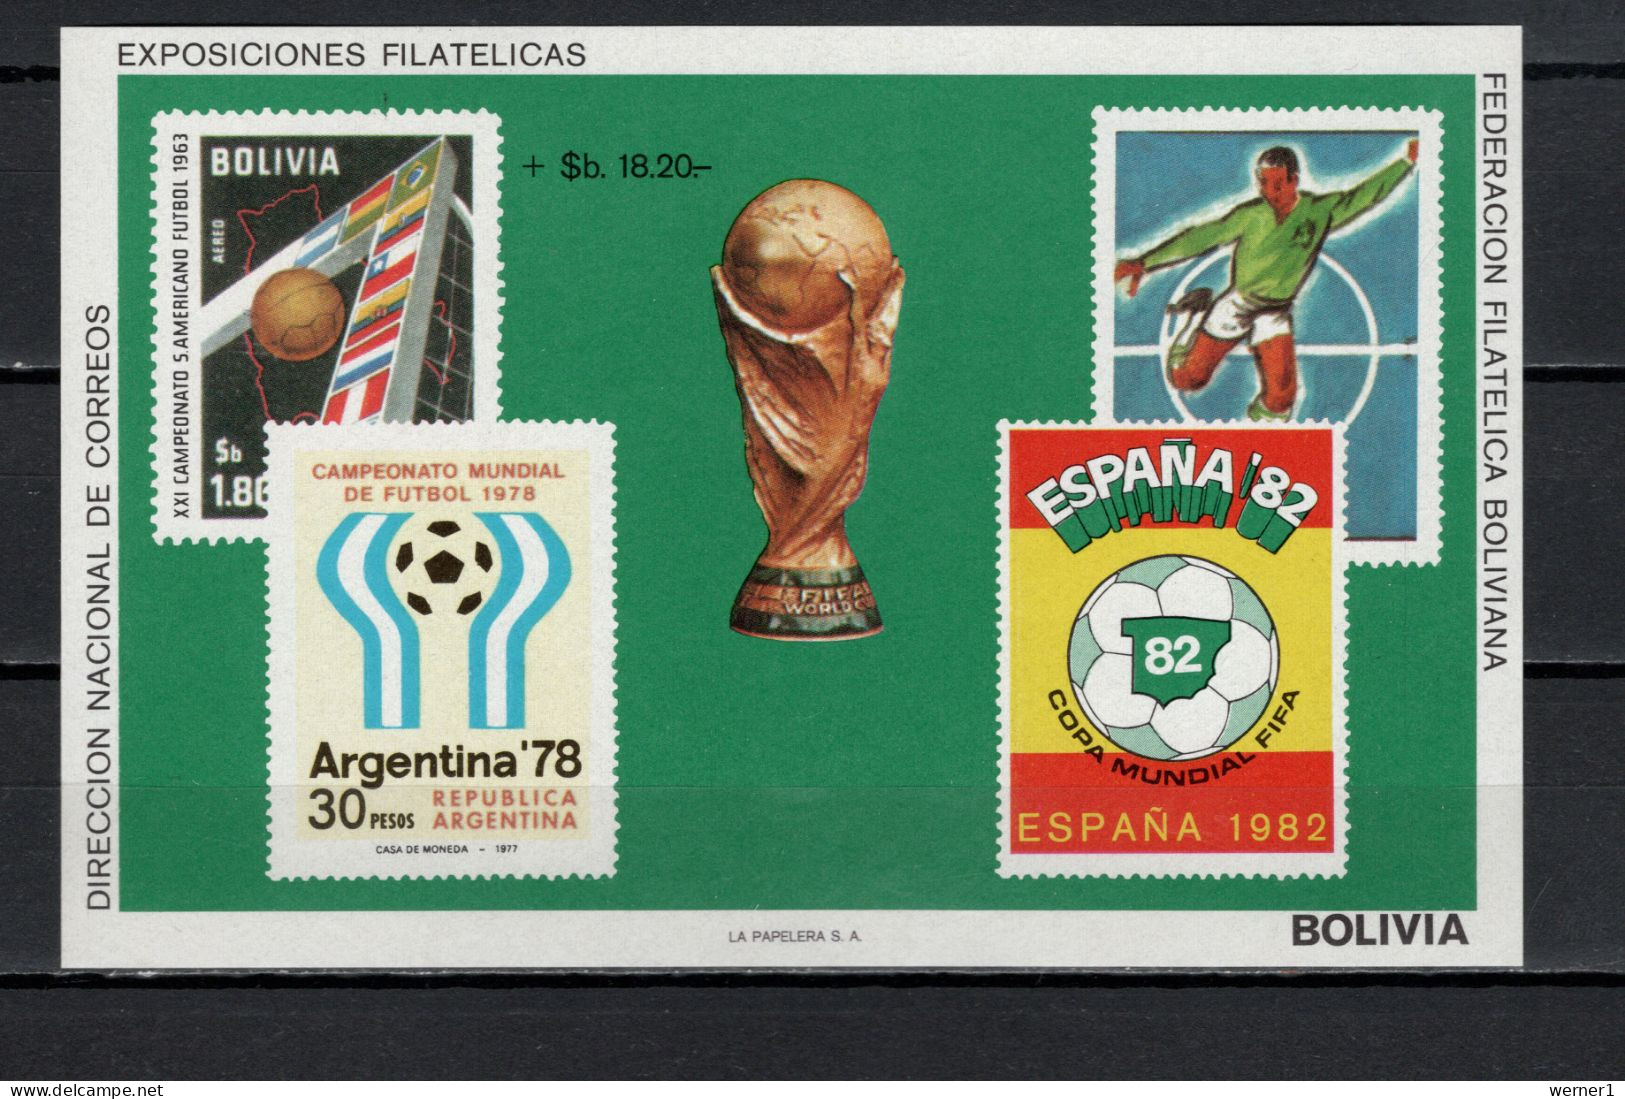 Bolivia 1979 Football Soccer World Cup S/s MNH -scarce- - 1978 – Argentine